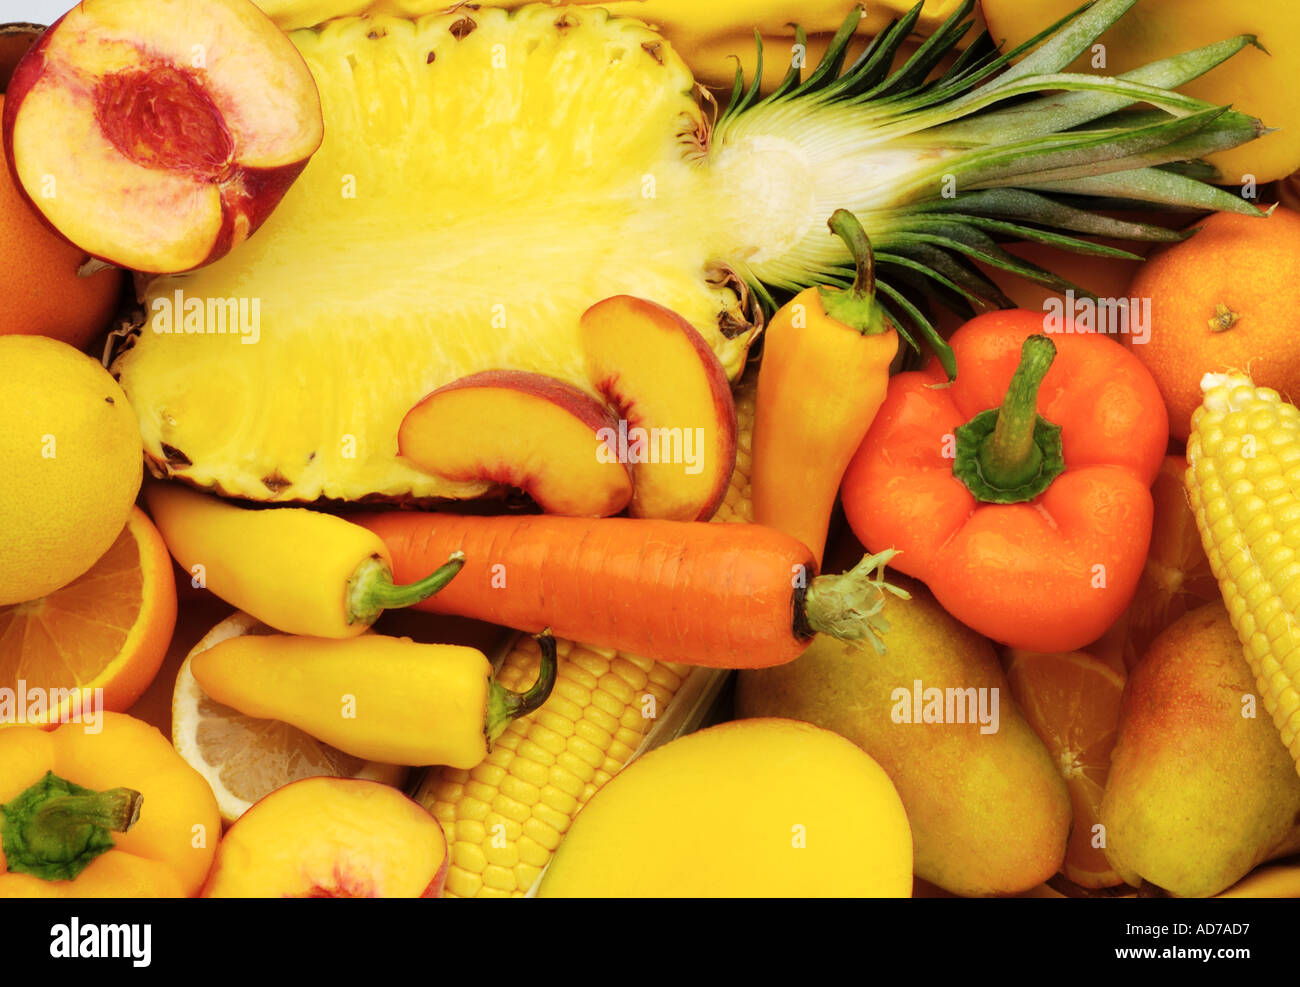 yellow and orange fruits and vegetables Stock Photo